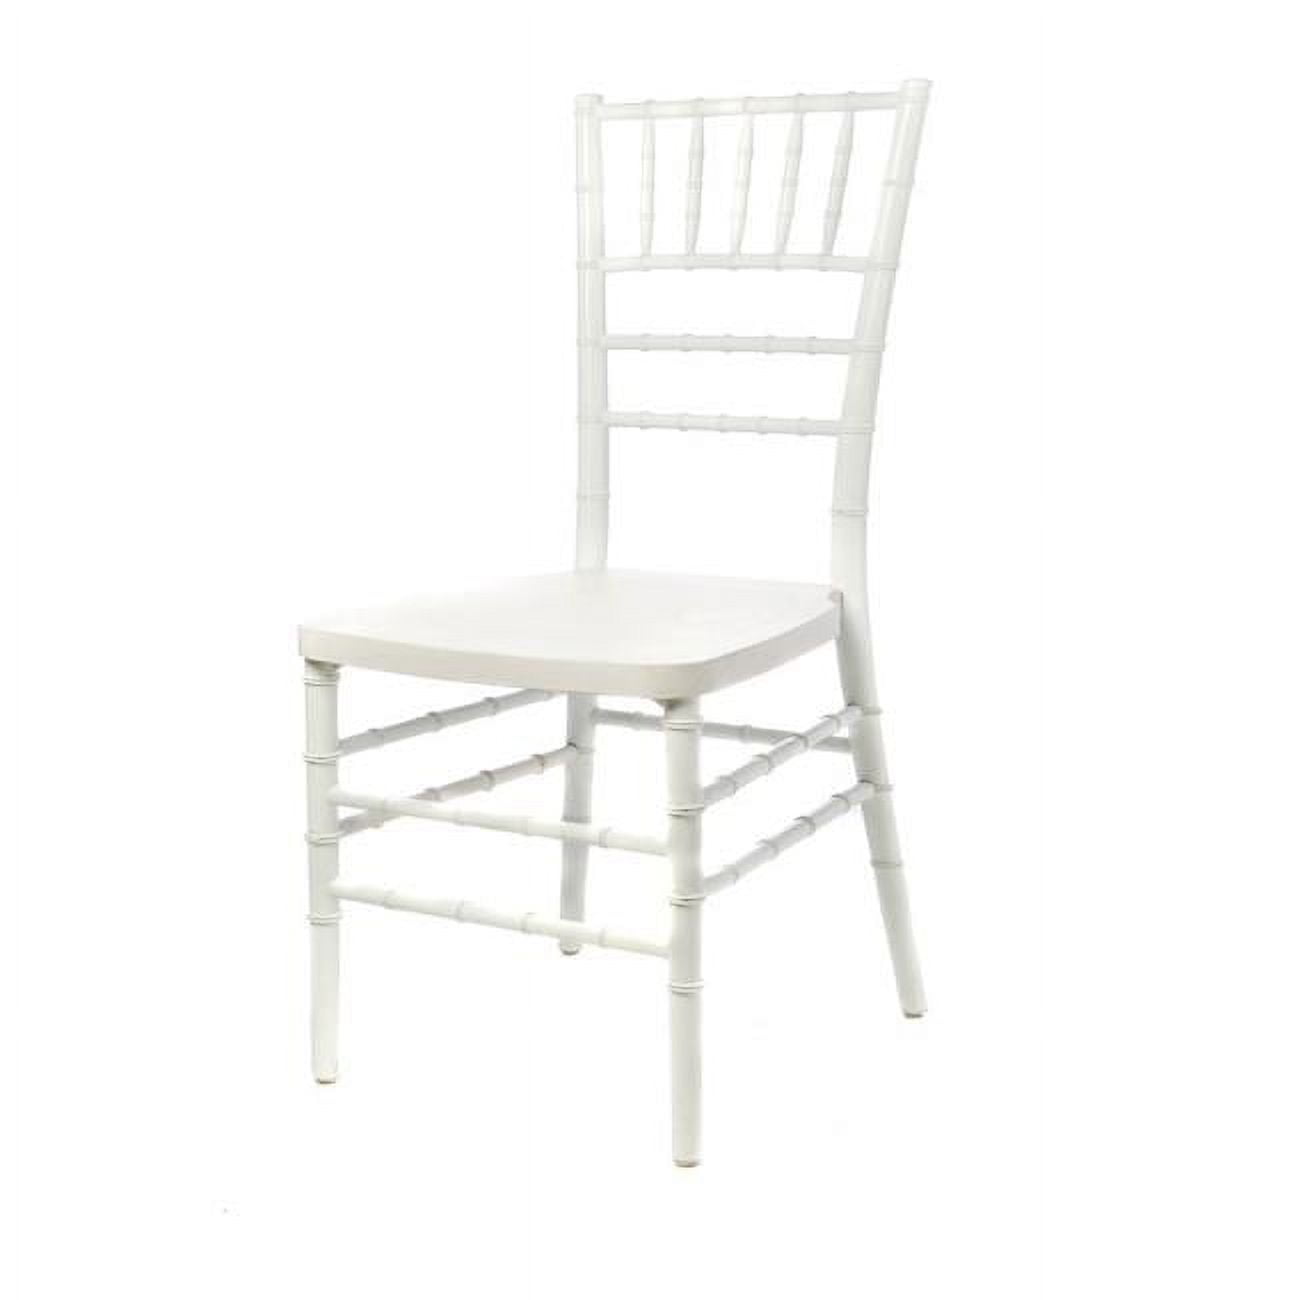 B-201-wh-web2 American Classic European Solid White Wood Dining Chair, Set Of 2 - 36 X 16 X 15 In.